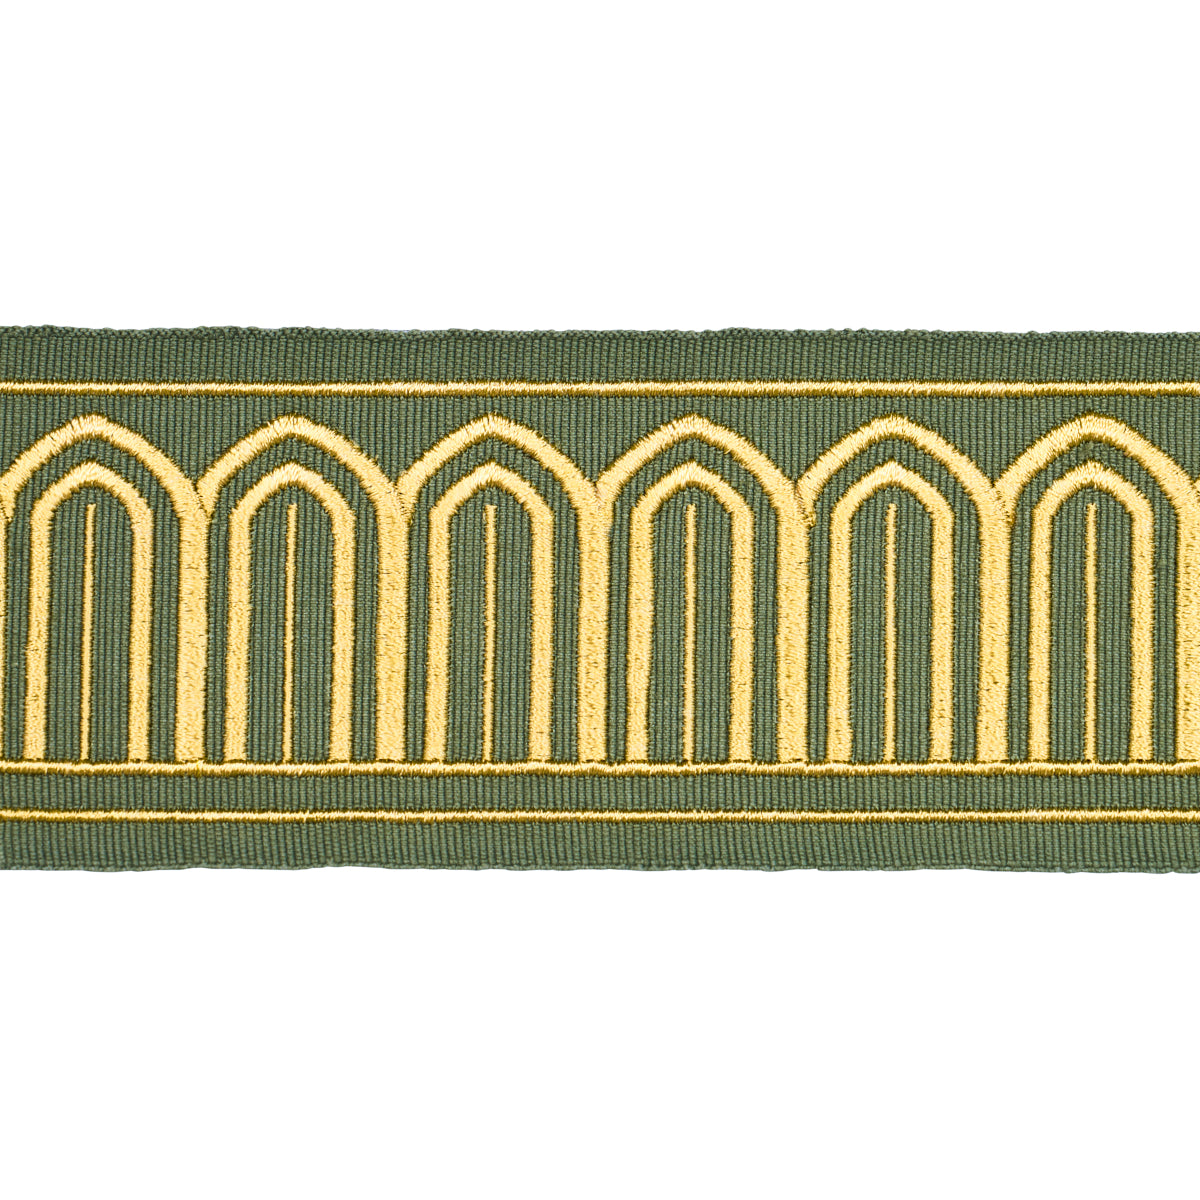 ARCHES EMBROIDERED TAPE MEDIUM | OLIVE